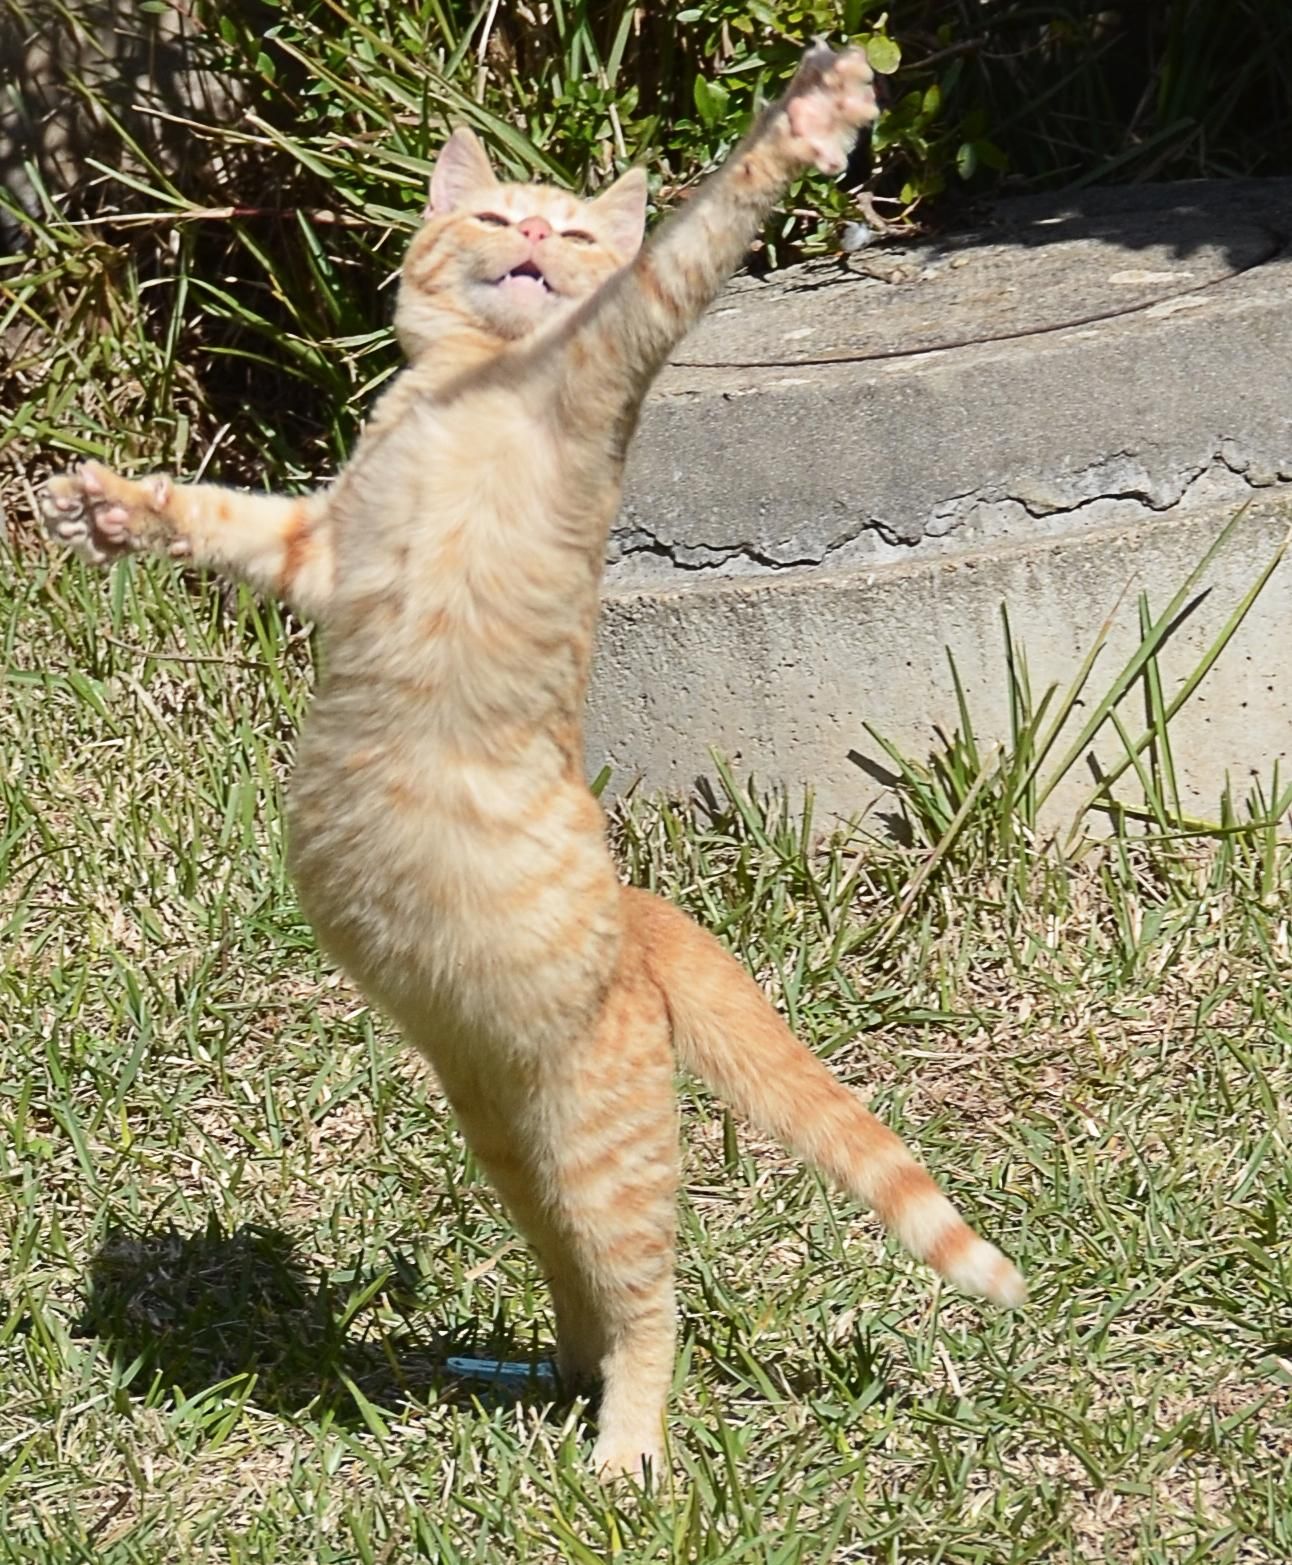 This cat just loves to dance